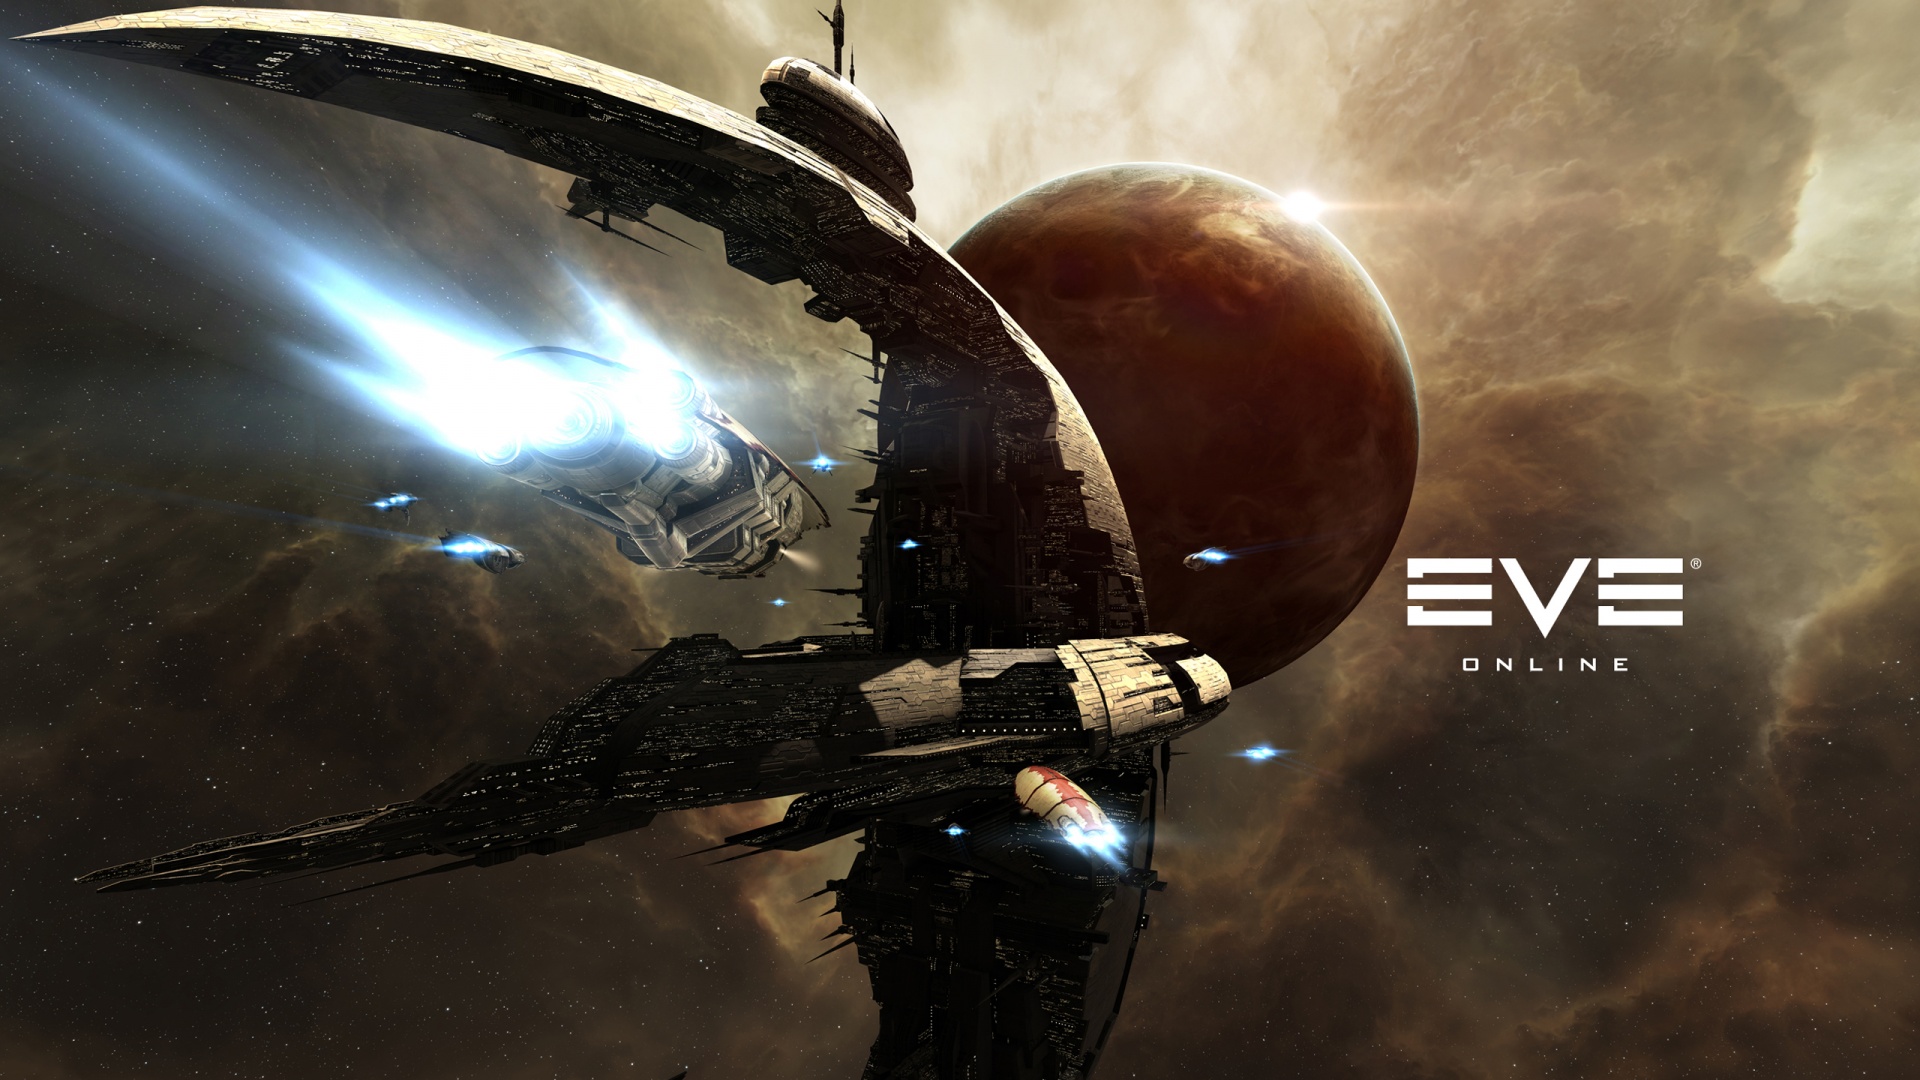 eve online wallpaper,space,pc game,screenshot,outer space,sphere